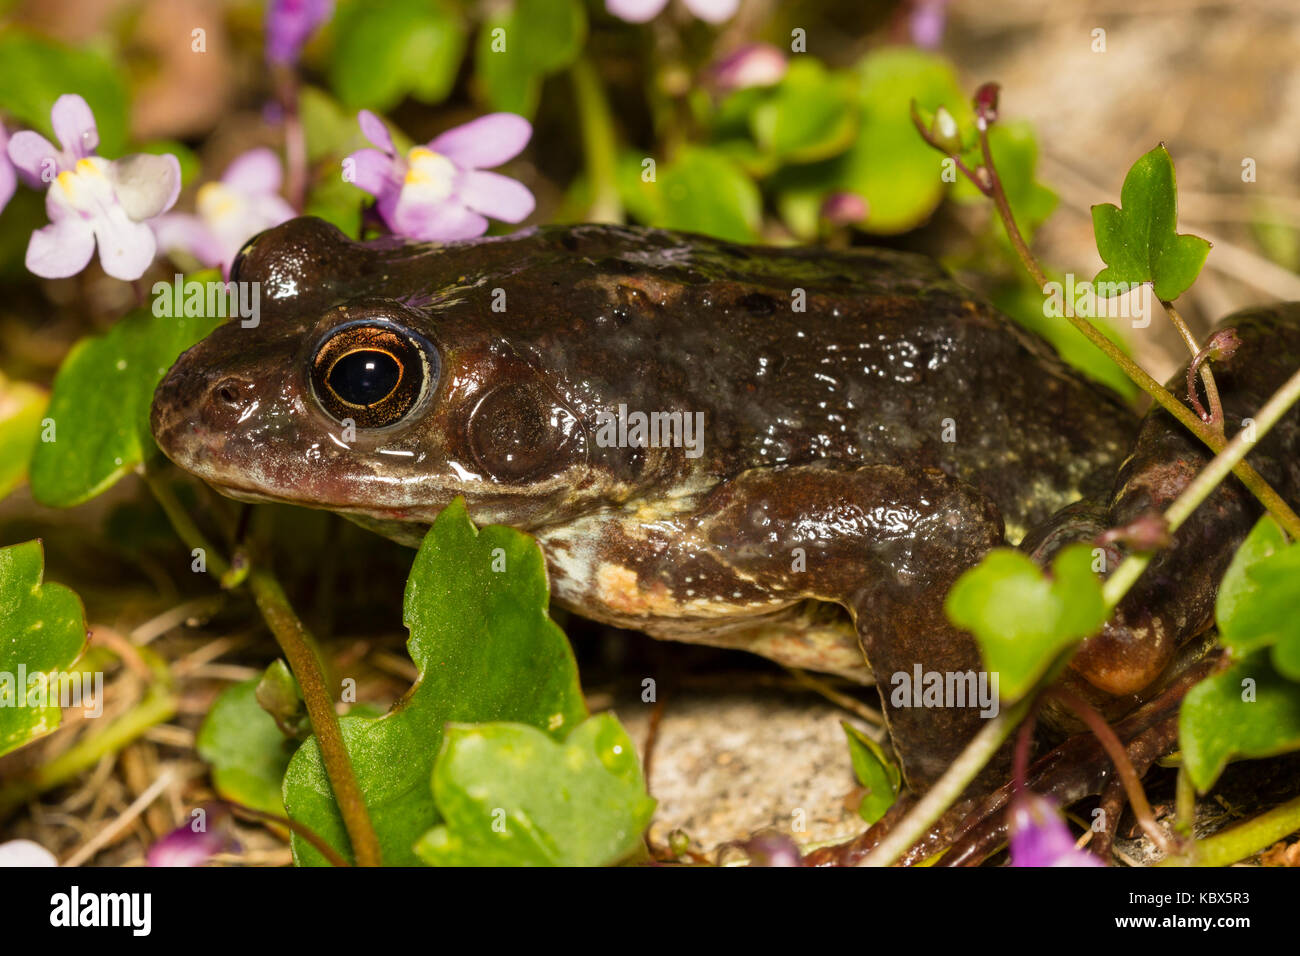 UK common frog, Rana temporaria, in vegetation by the side of a garden pond Stock Photo